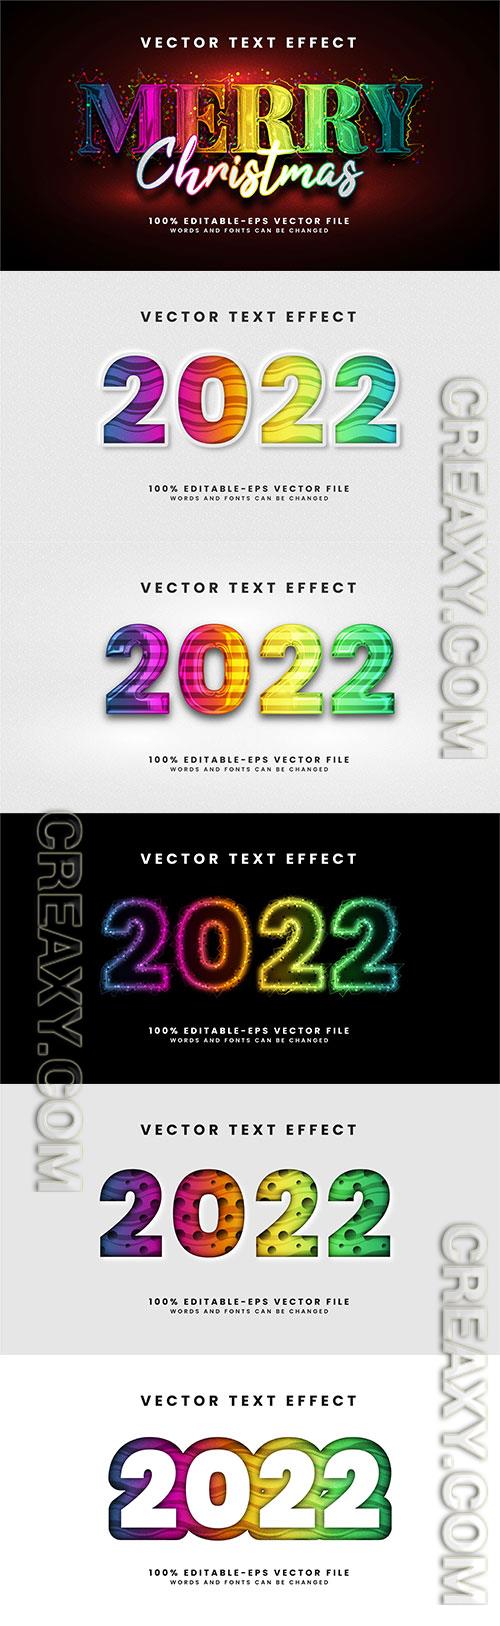 2022 glow text effect, editable text style effect with colorful theme, premium vector